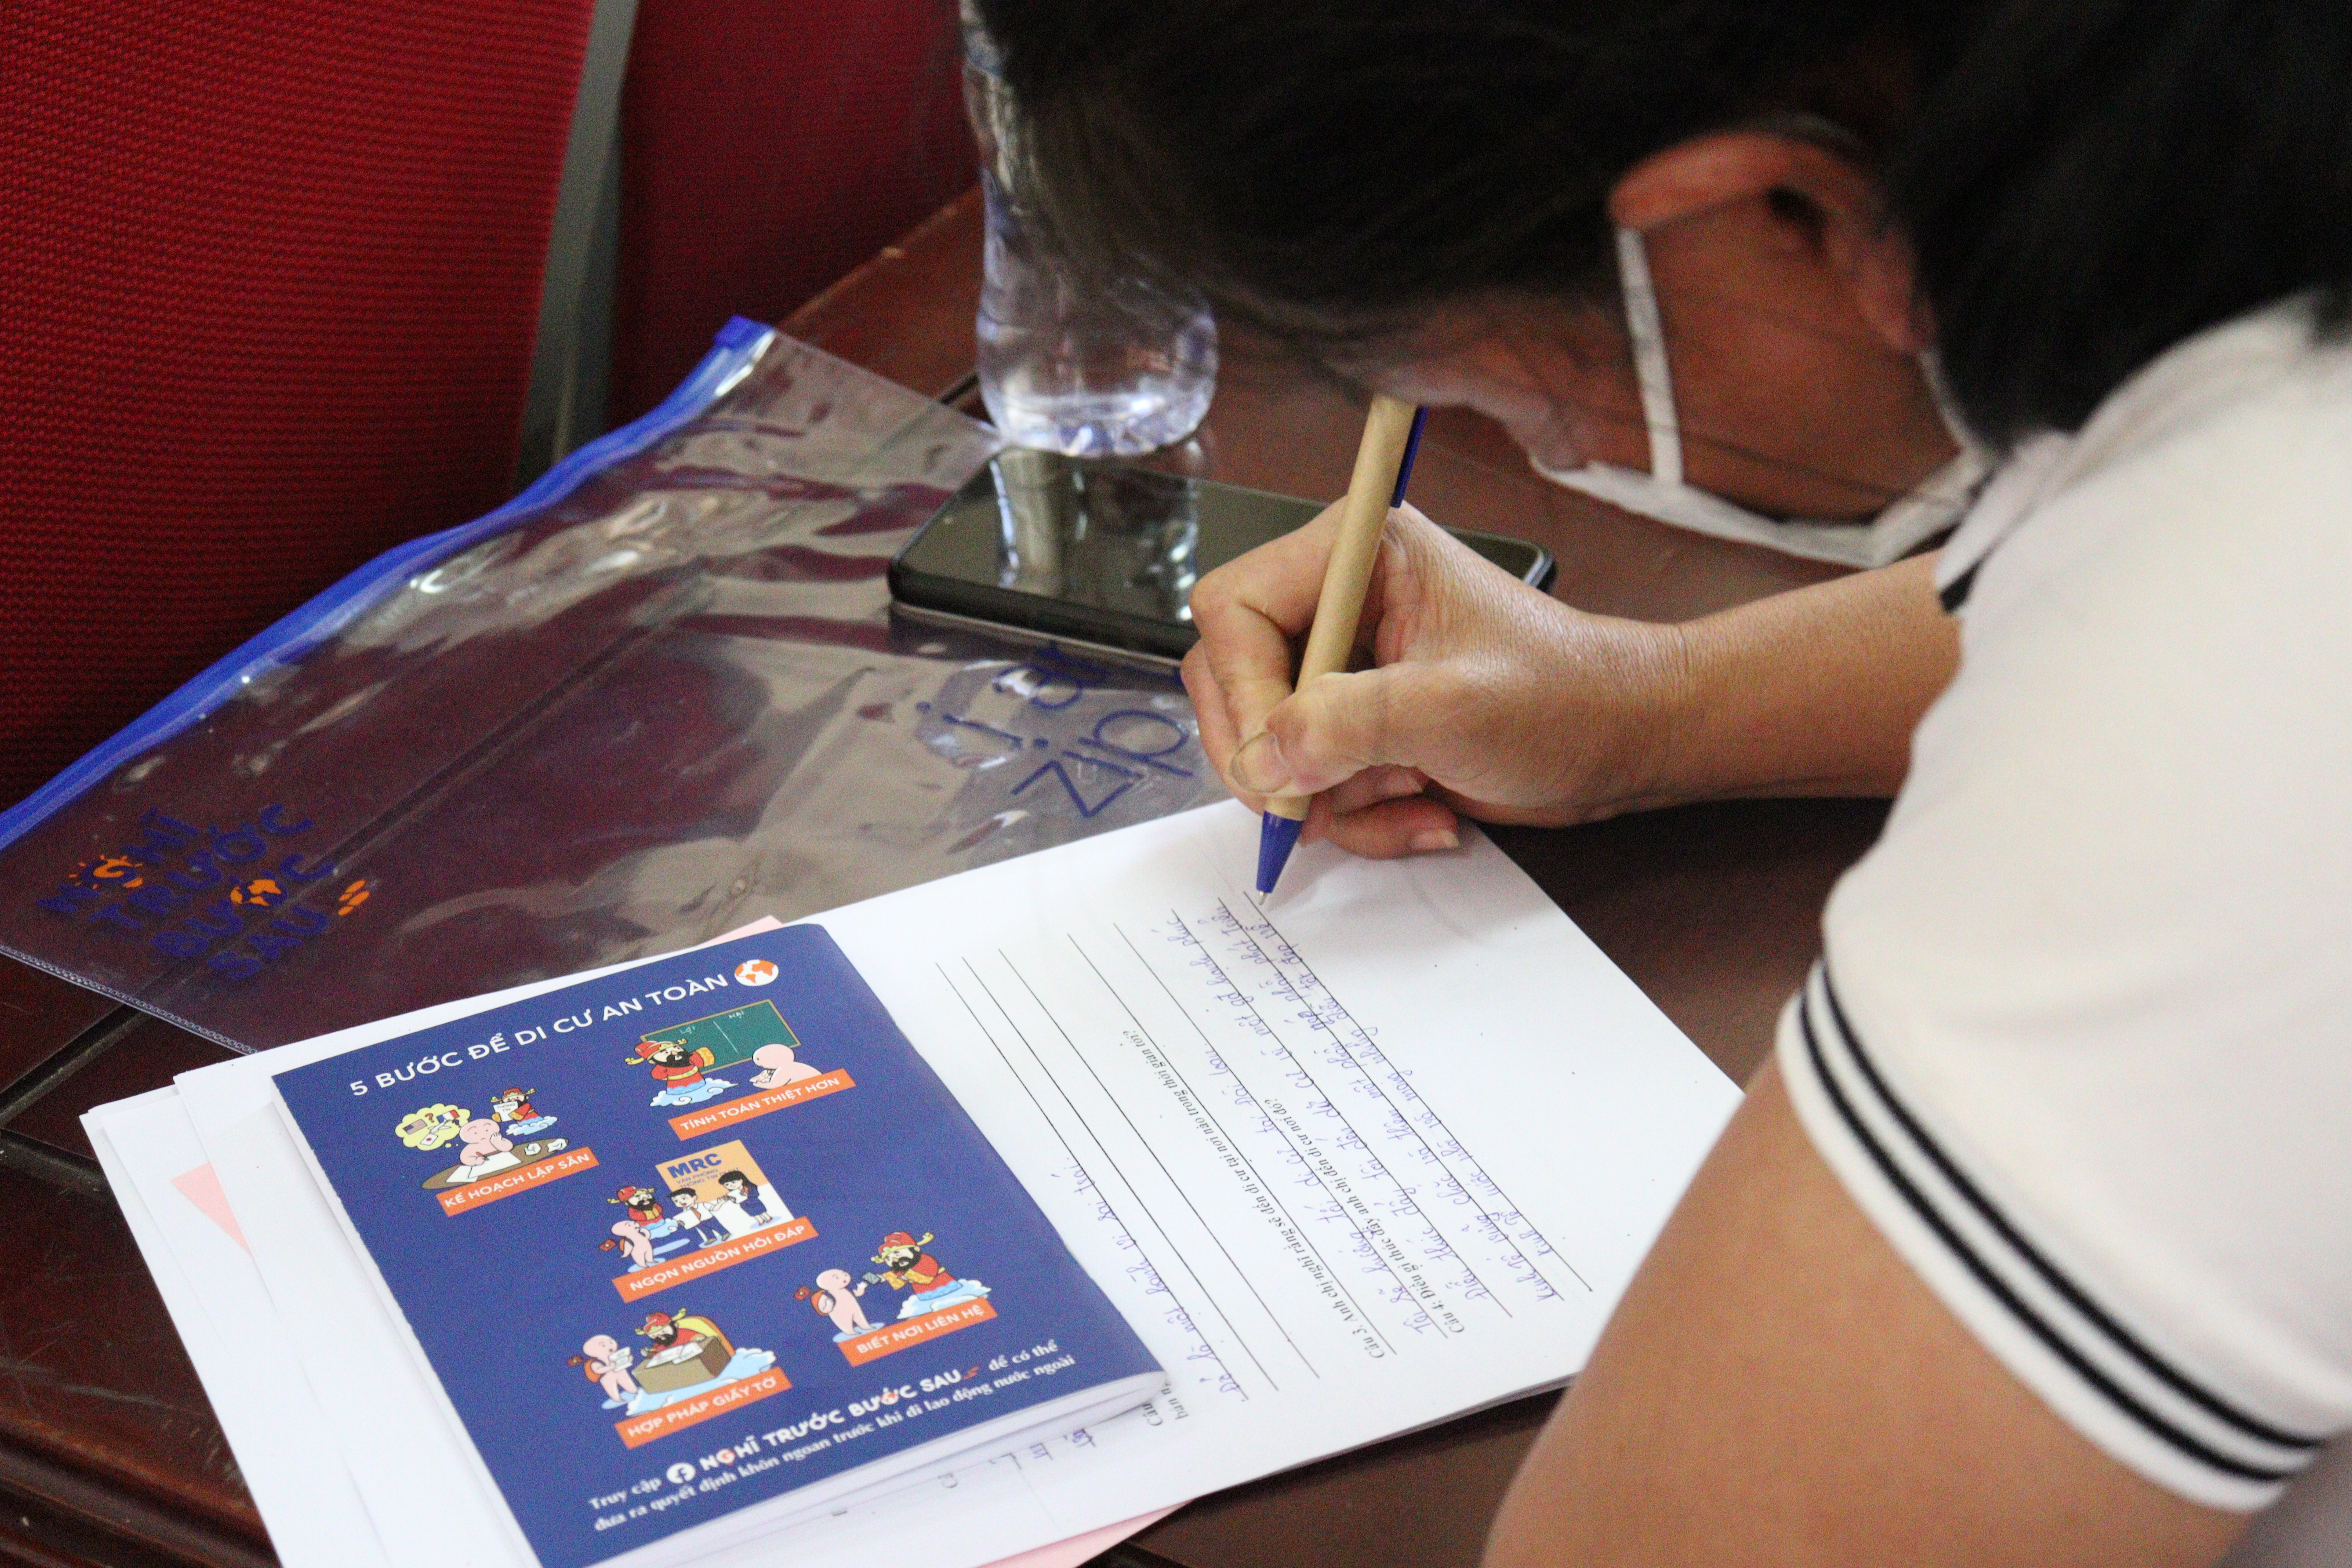 An international migrant worker who returned to Nghia Dan writes her reintegration plan when attending IOM’s training on sustainable reintegration and safe migration. Photo: IOM Viet Nam